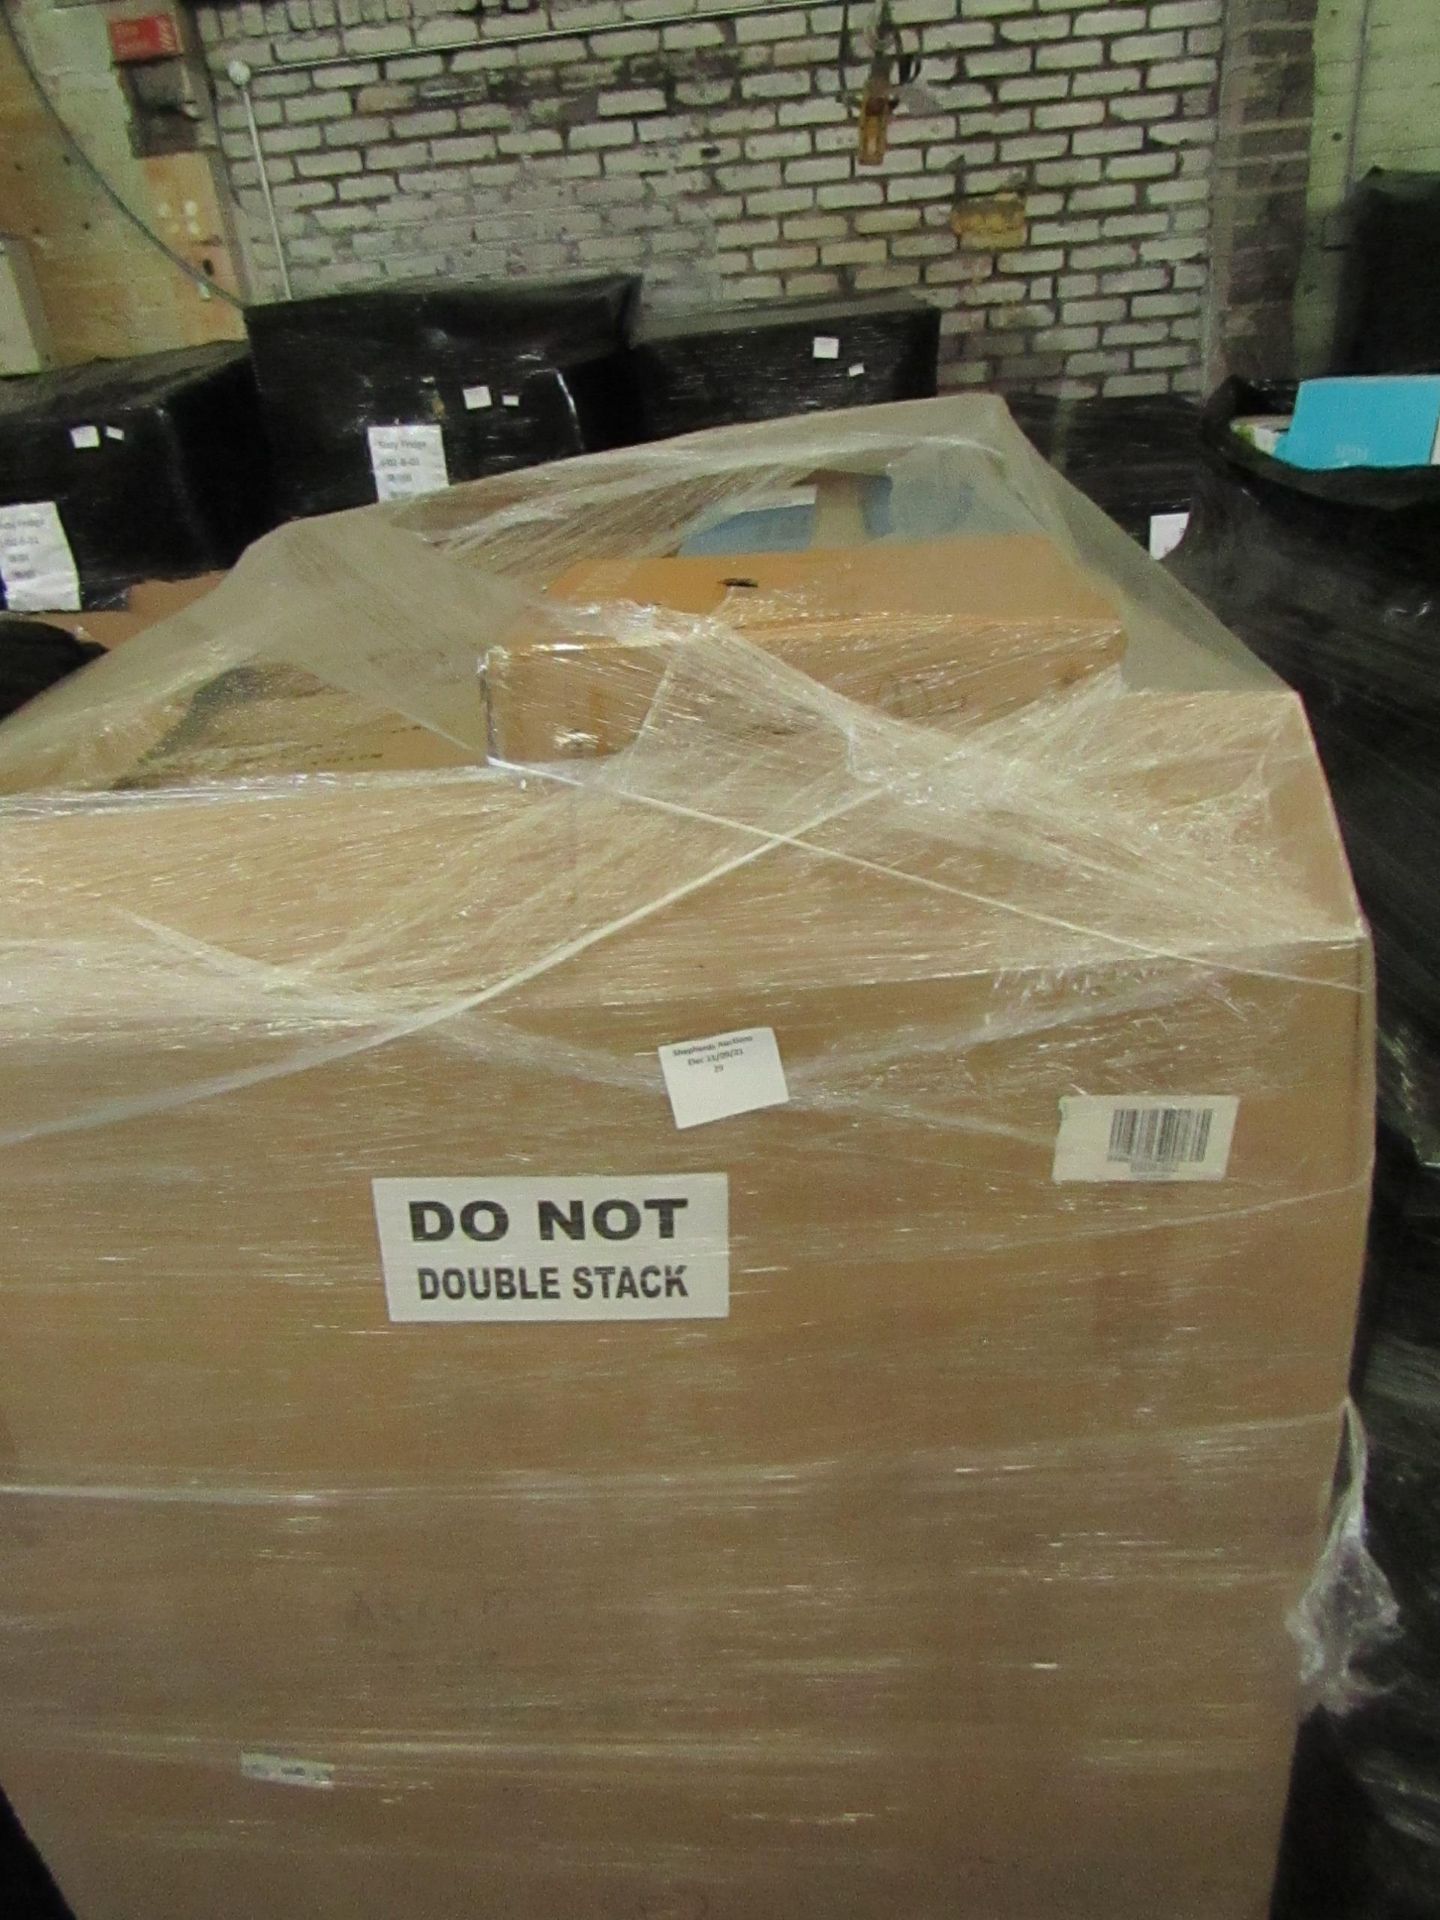 | 1x | PALLET CONTAINING CUSTOMER RETURN STOCK FROM A LARGE ONLINE RETAILER | UNMANIFESTED |